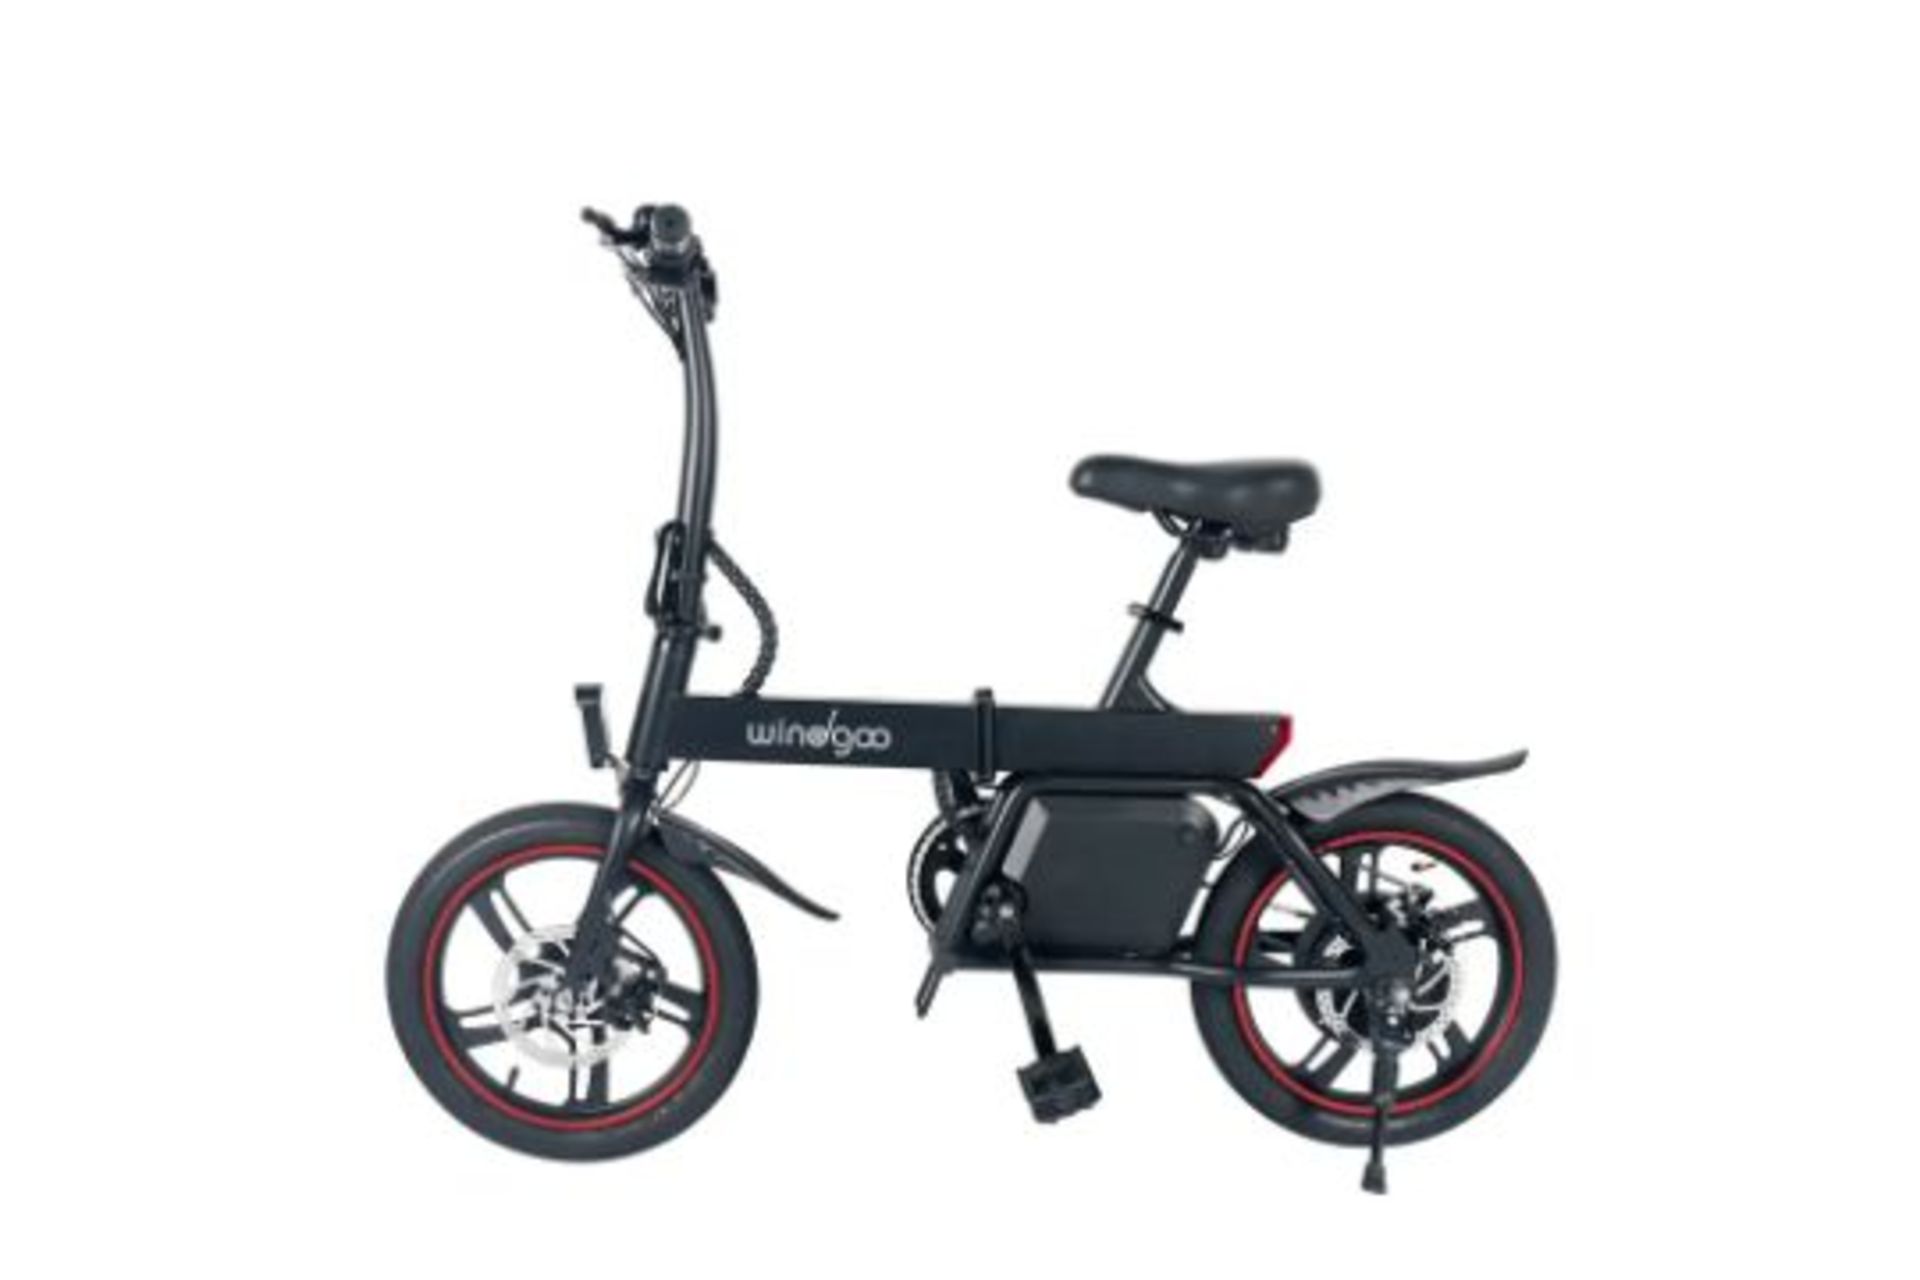 5 X BRAND NEW Windgoo B20 Pro Electric Bike. RRP £1,100.99. With 16-inch-wide tires and a frame of